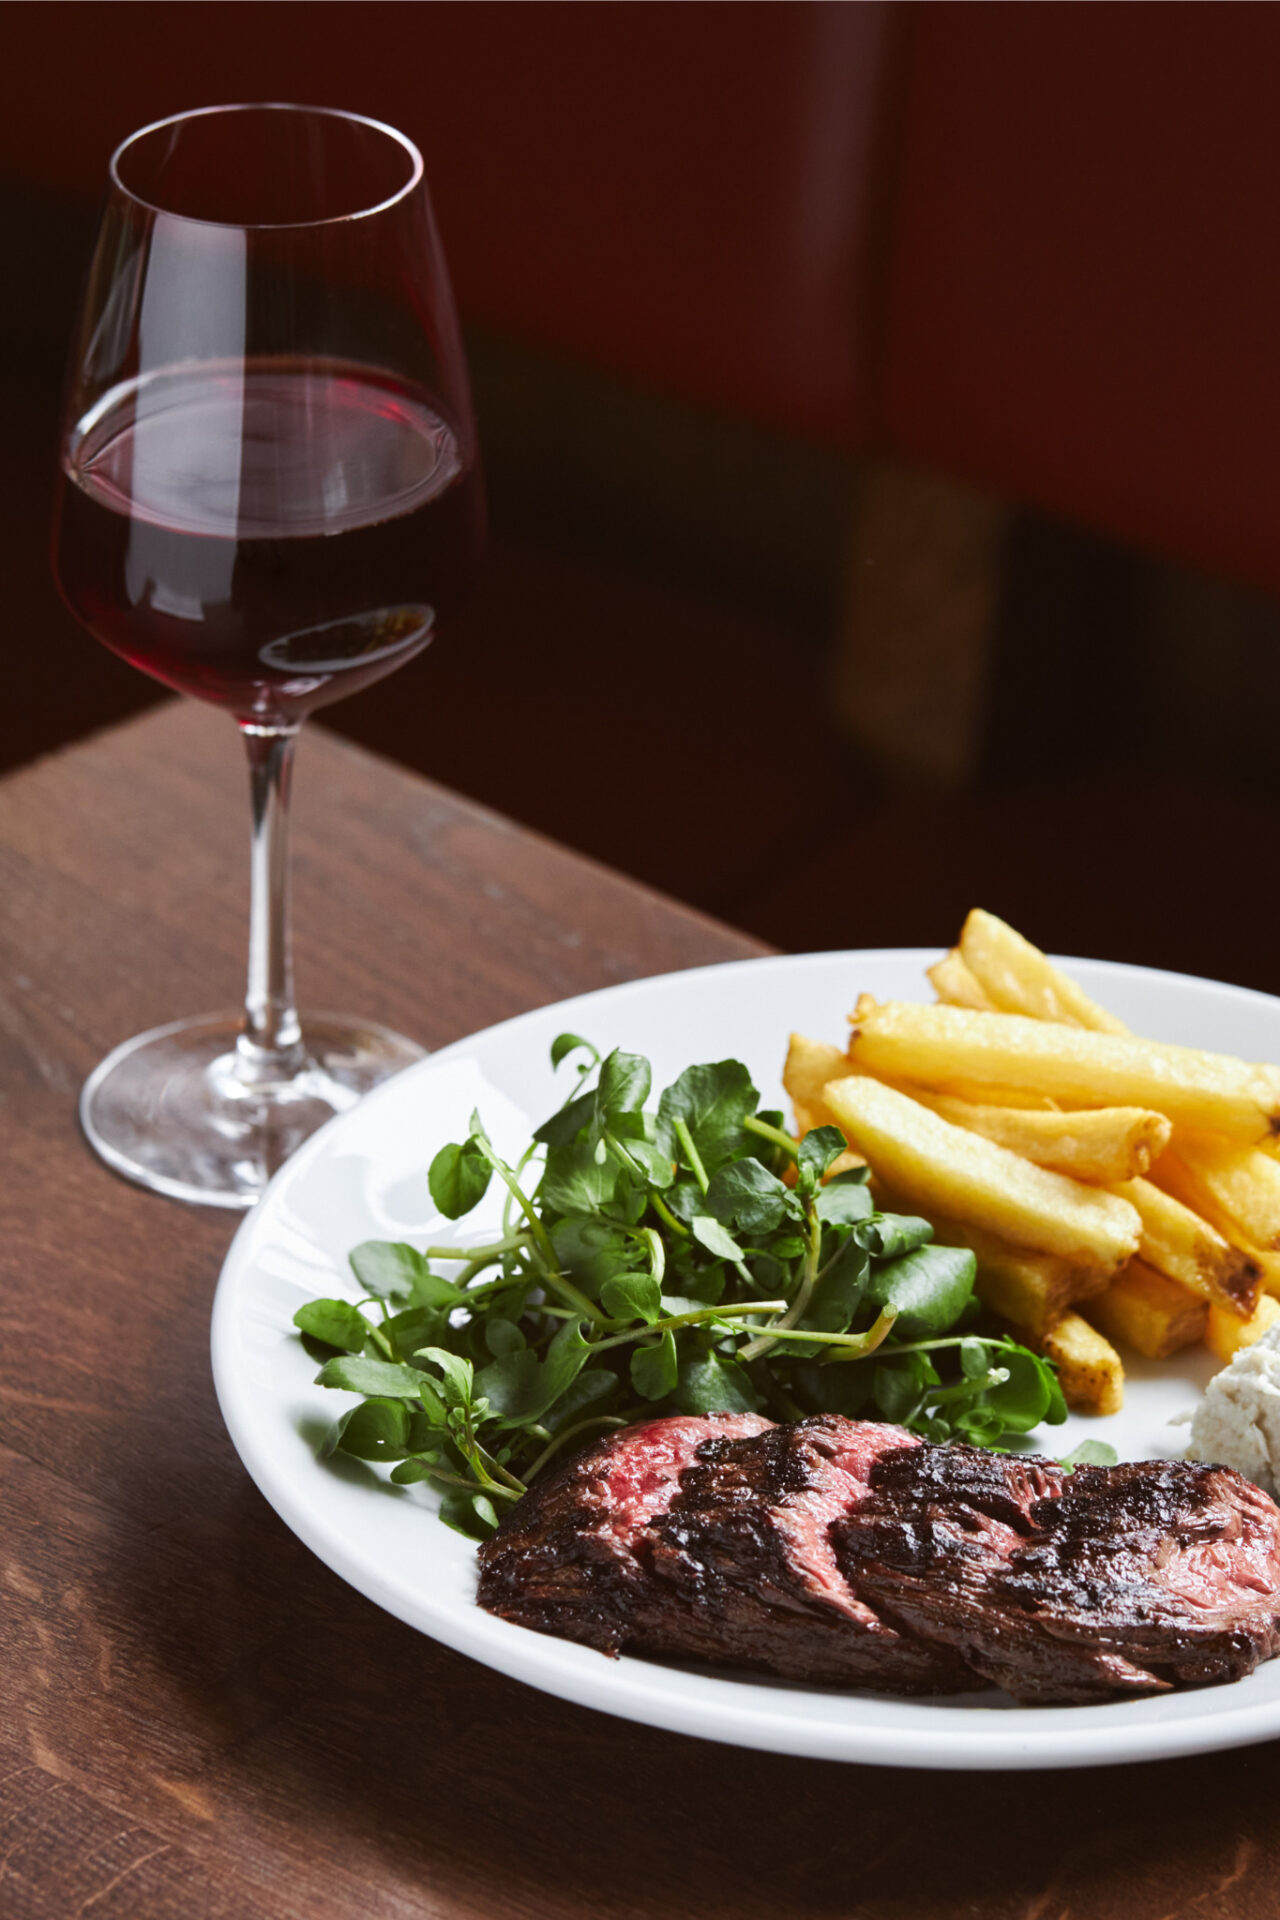 Best wine with steak pairings - Red wine paired with steak and fries